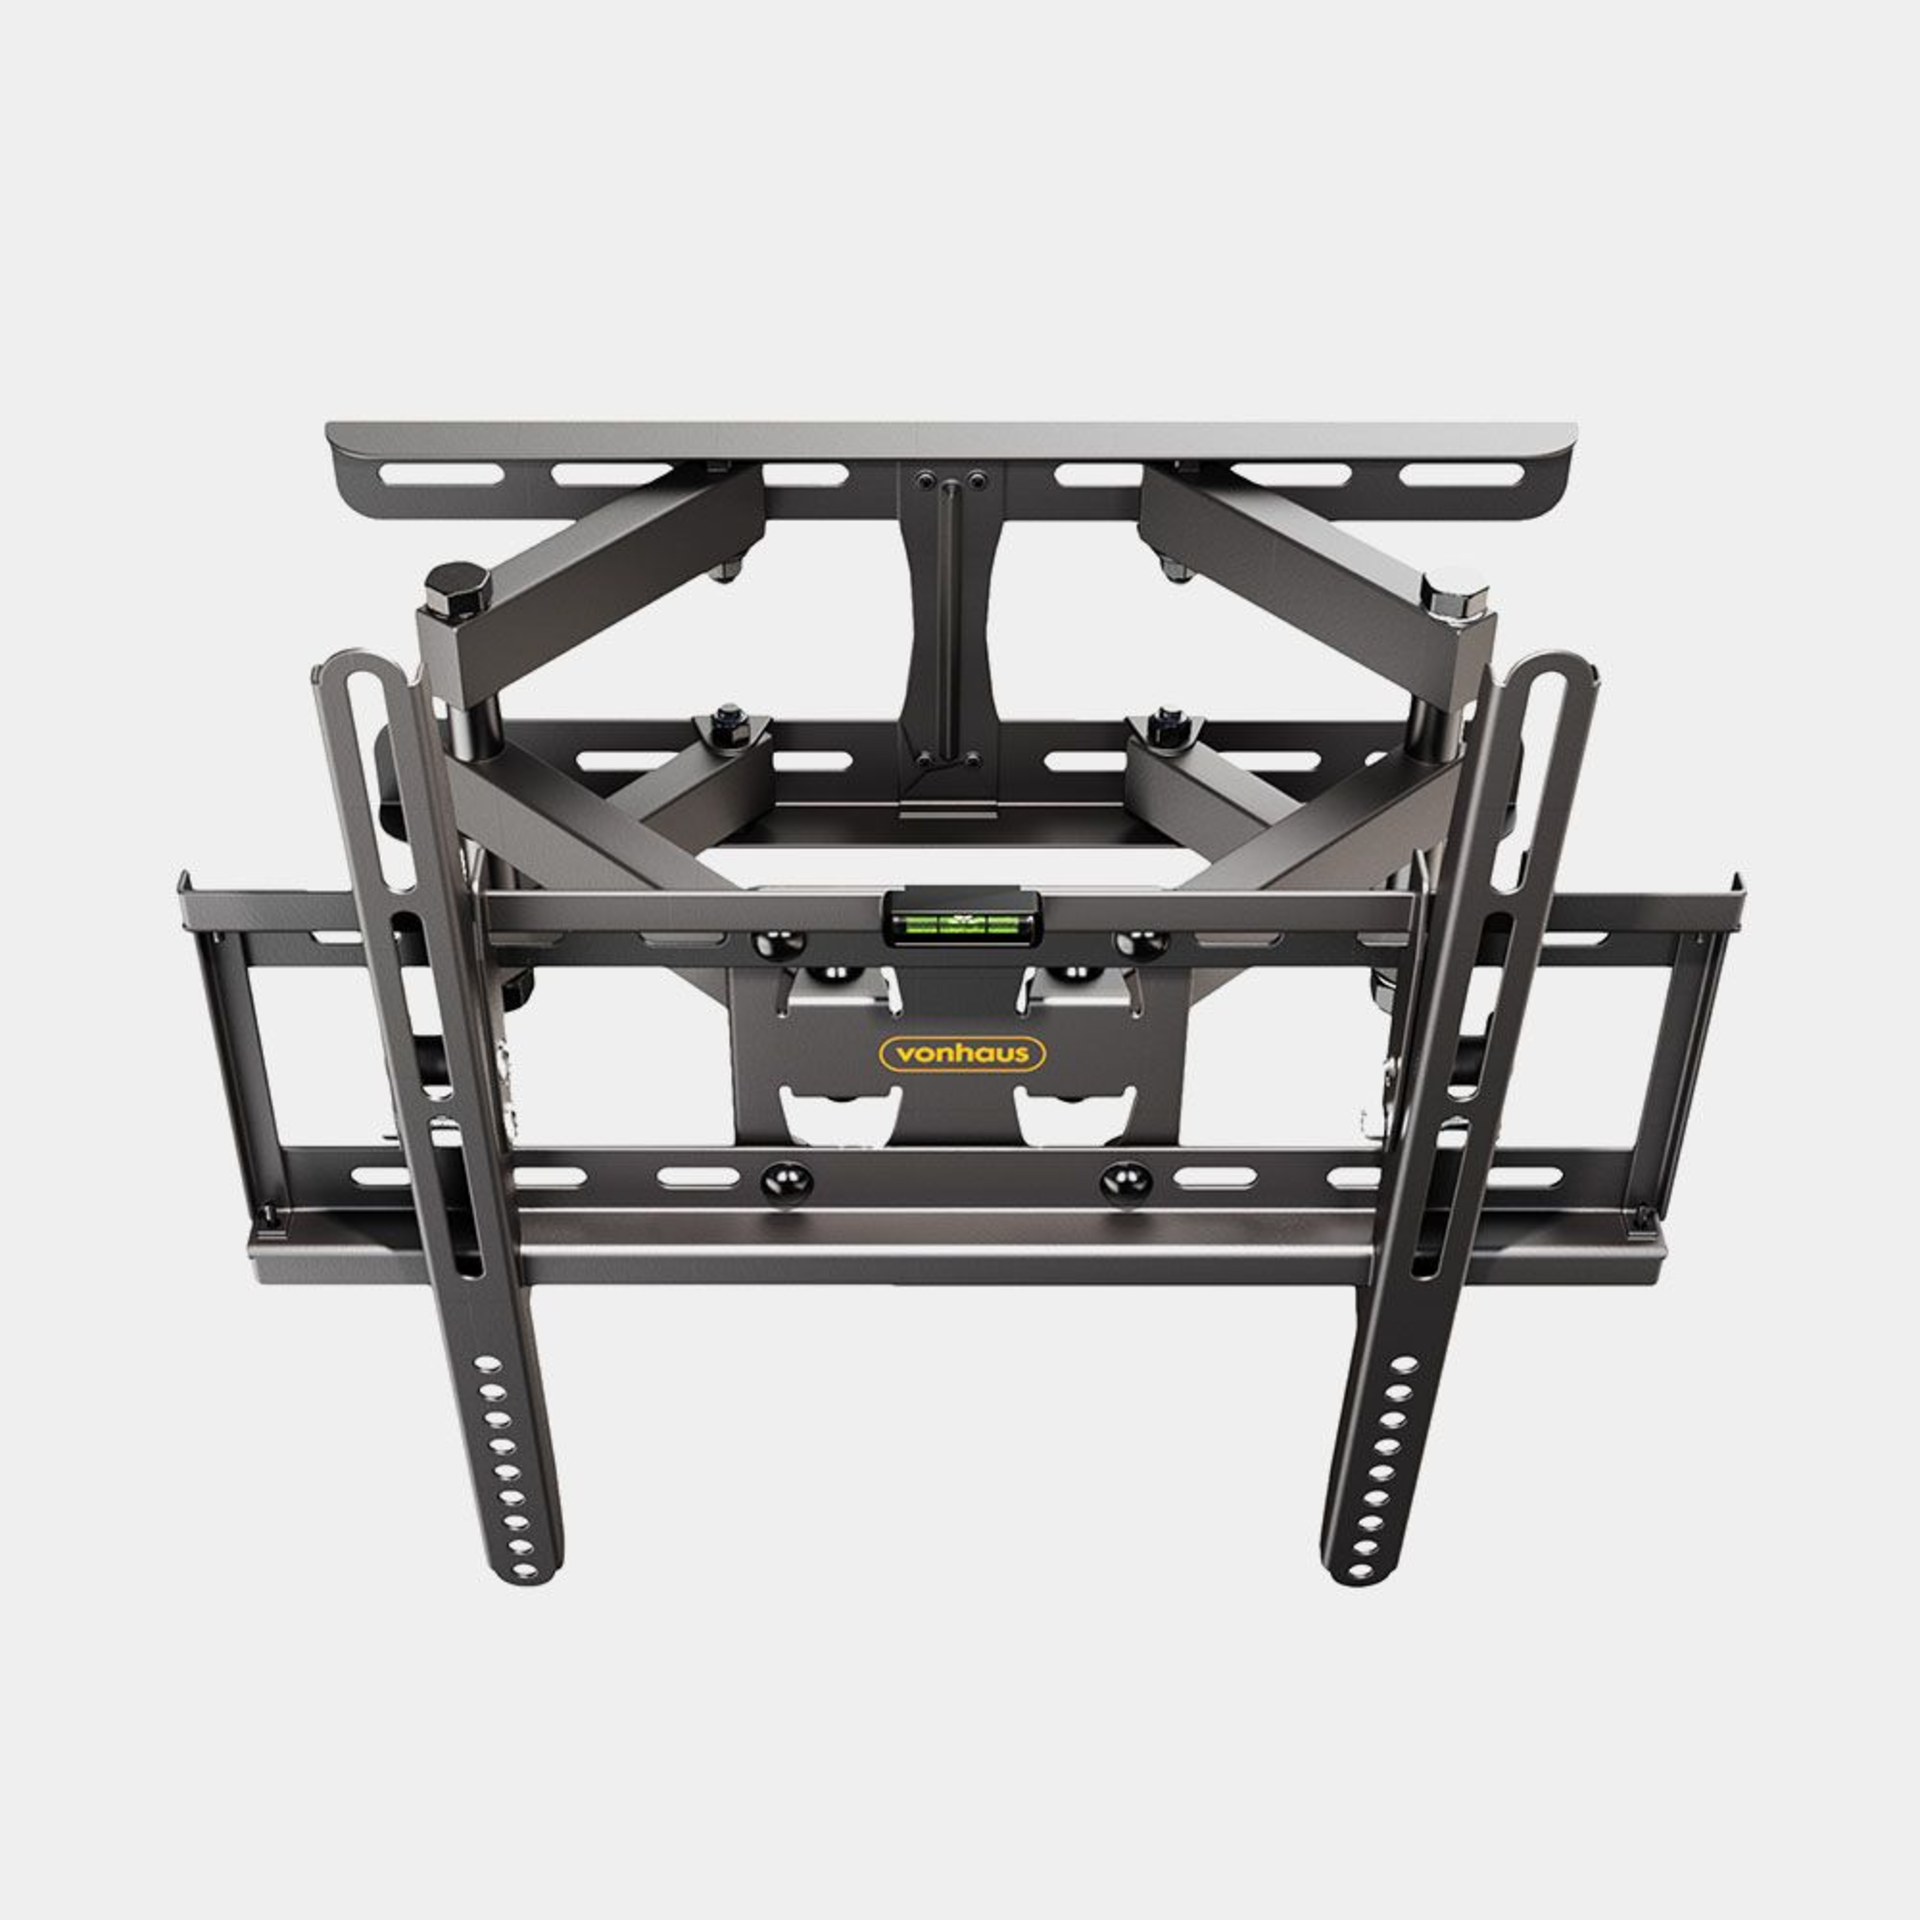 23-56 Inch Cantilever TV Bracket 23-56 inch Cantilever TV bracketTransform your TV viewing